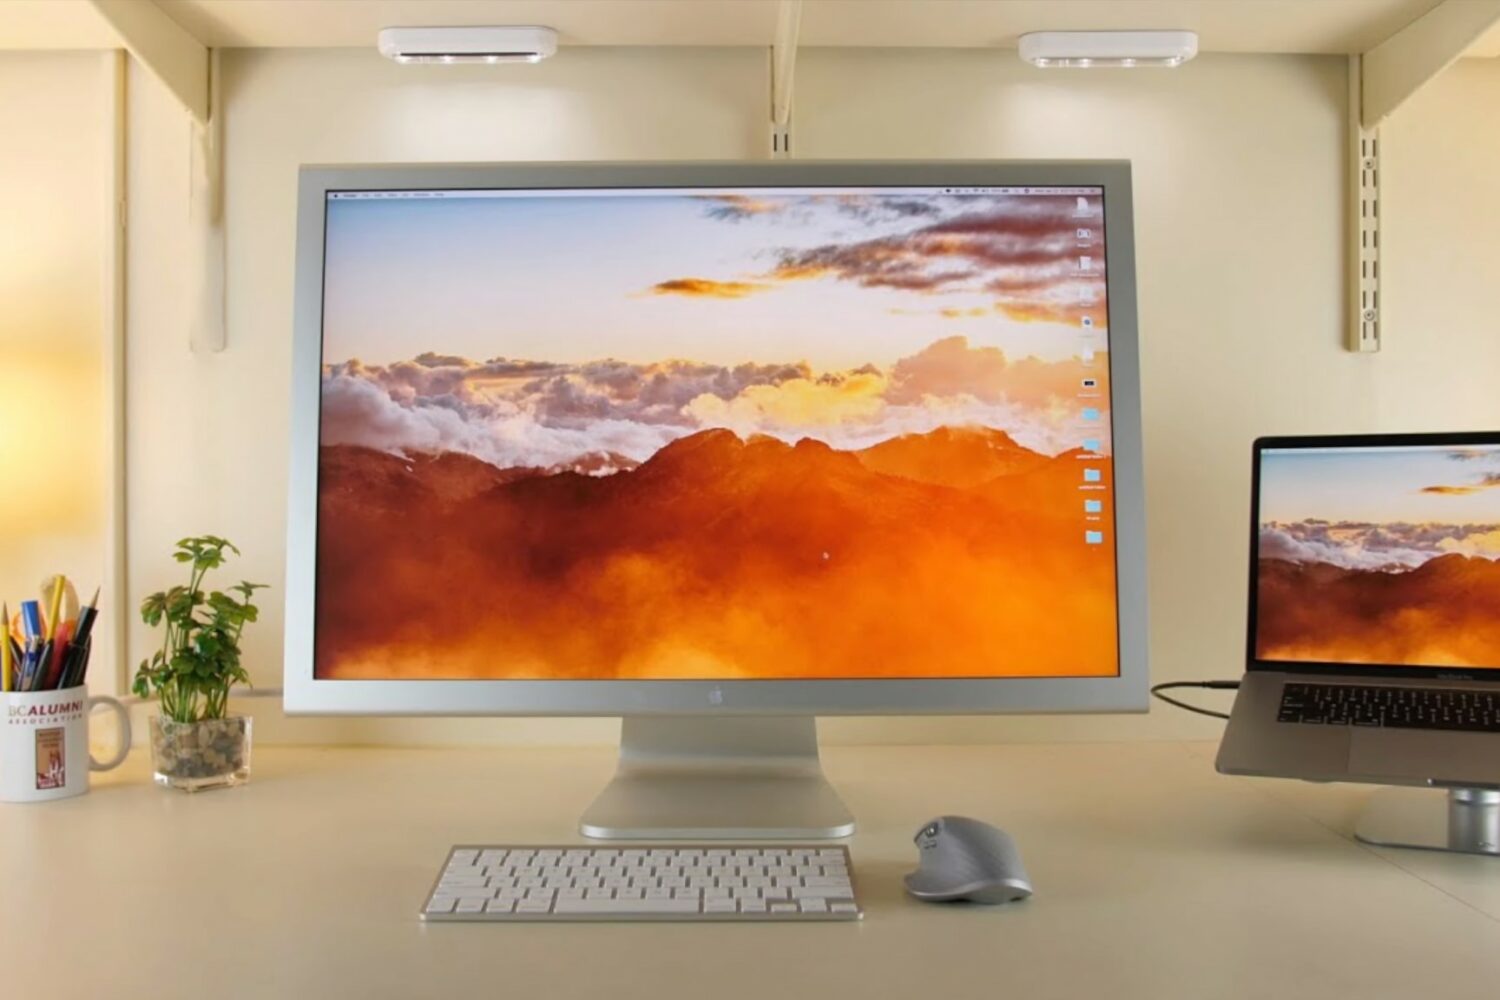 A photograph showing a 30-inch Apple Cinema Display on a work desk next to a MacBook Pro